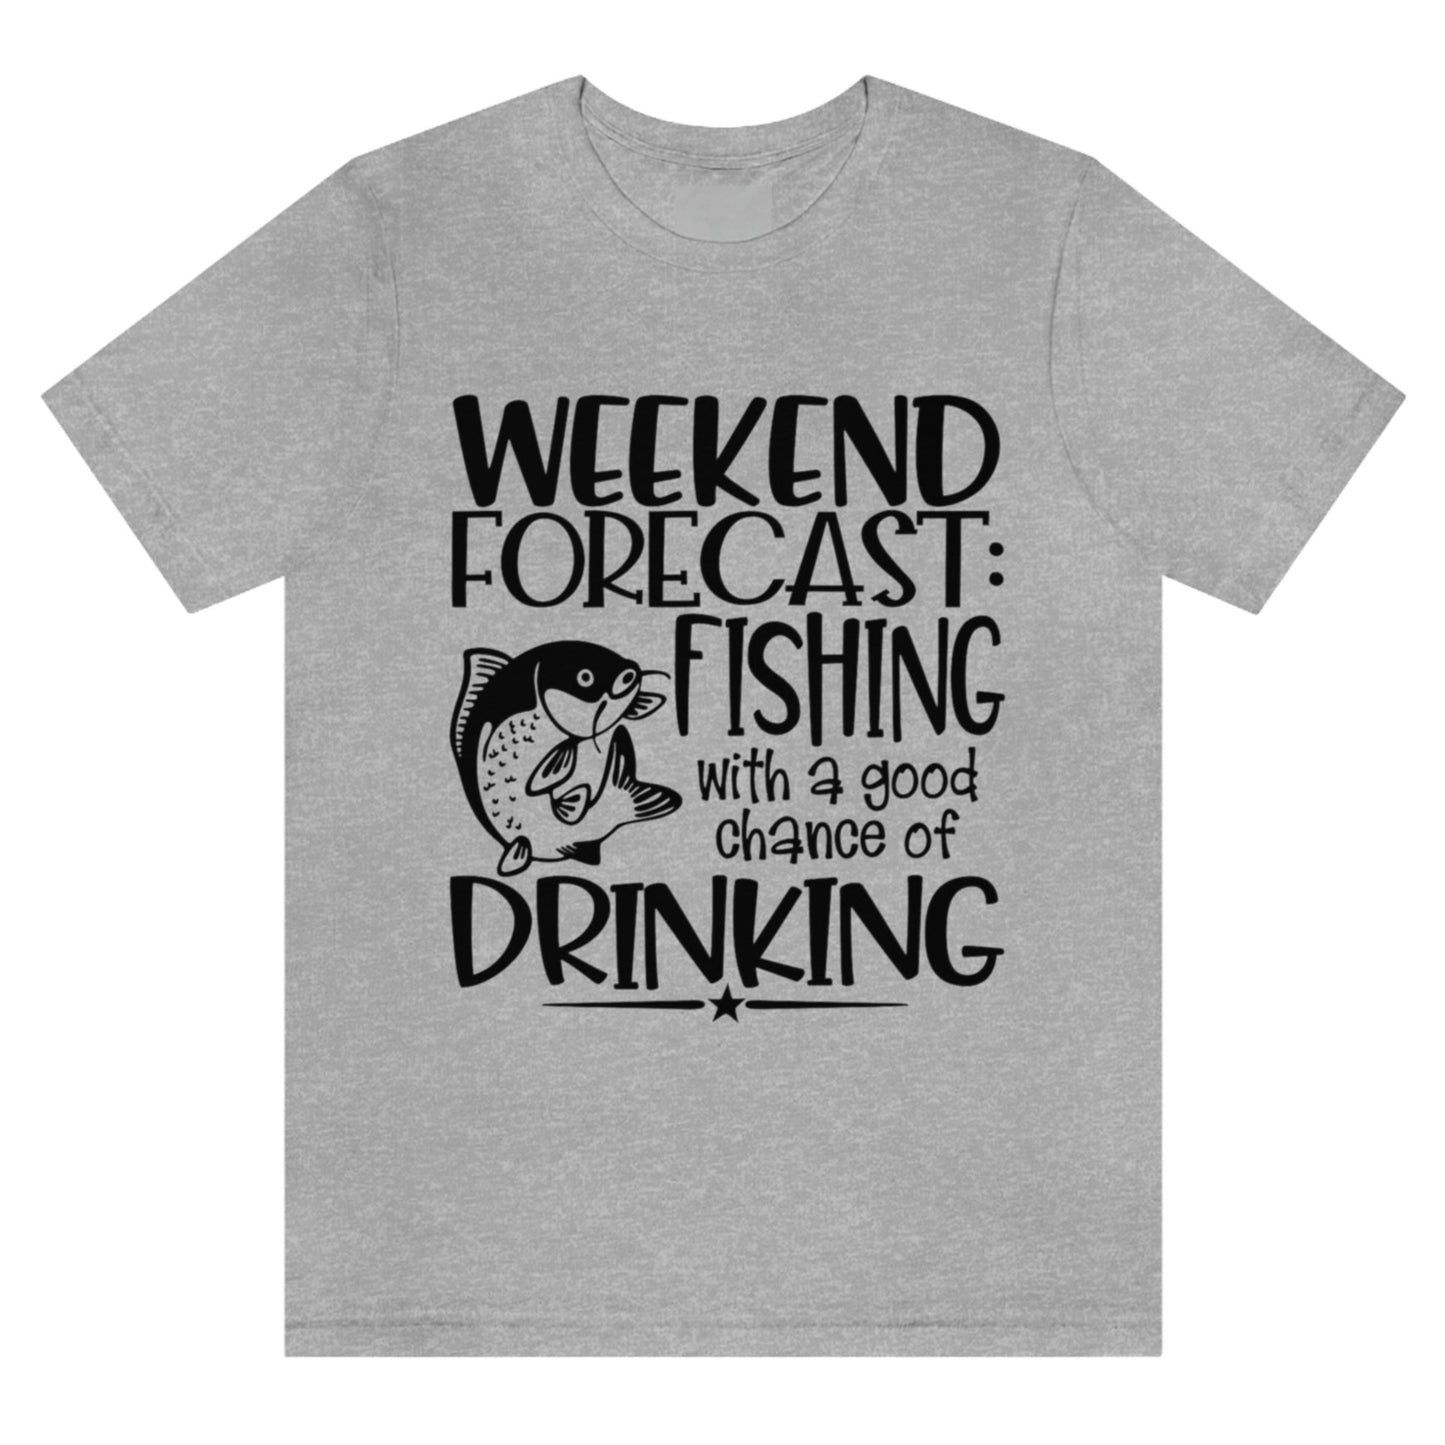 weekend-forecast-fishing-with-a-good-chance-of-drinking-athletic-heather-grey-t-shirt